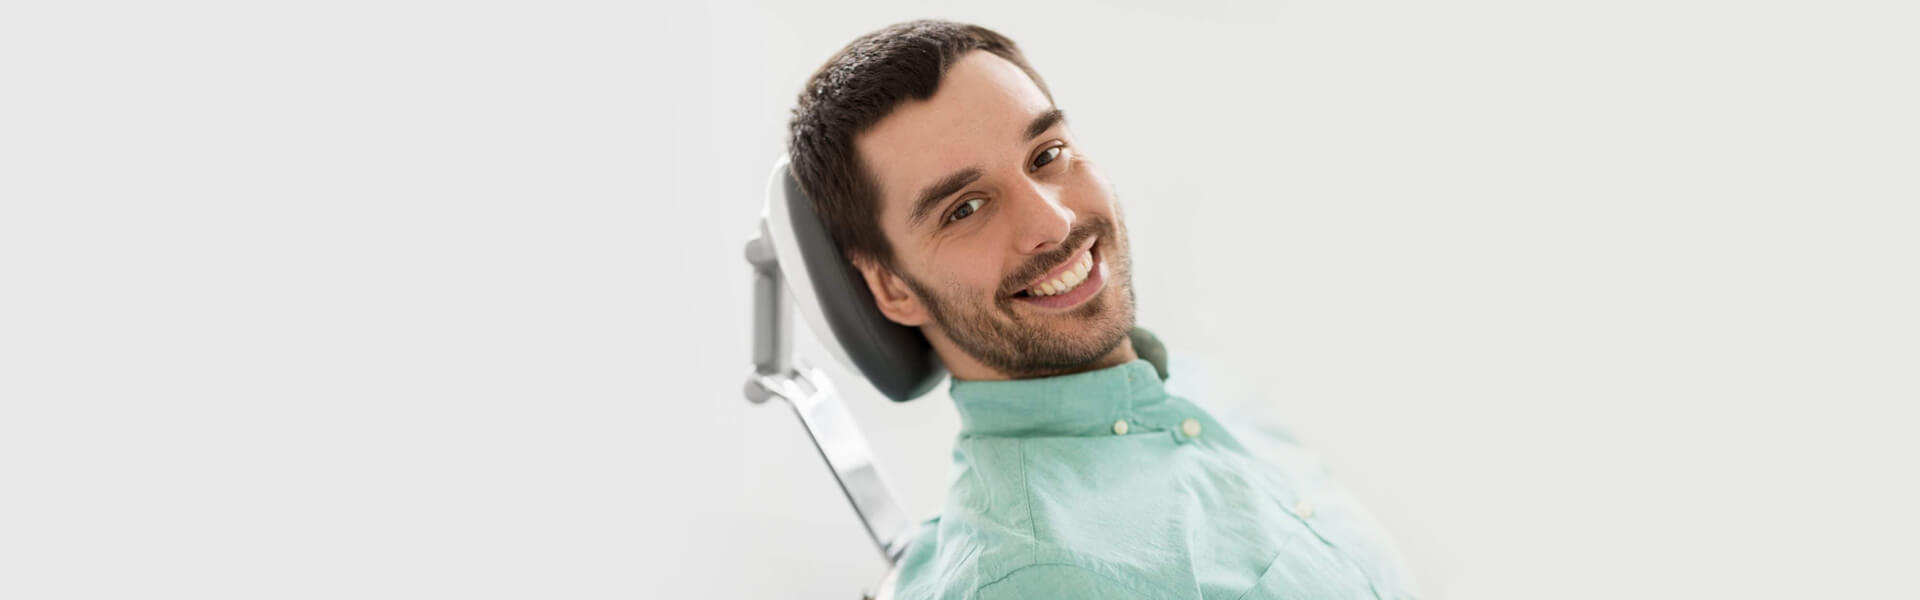 Do Not Let Your Discolored Teeth Affect Your Smile but Get Them Professionally Whitened